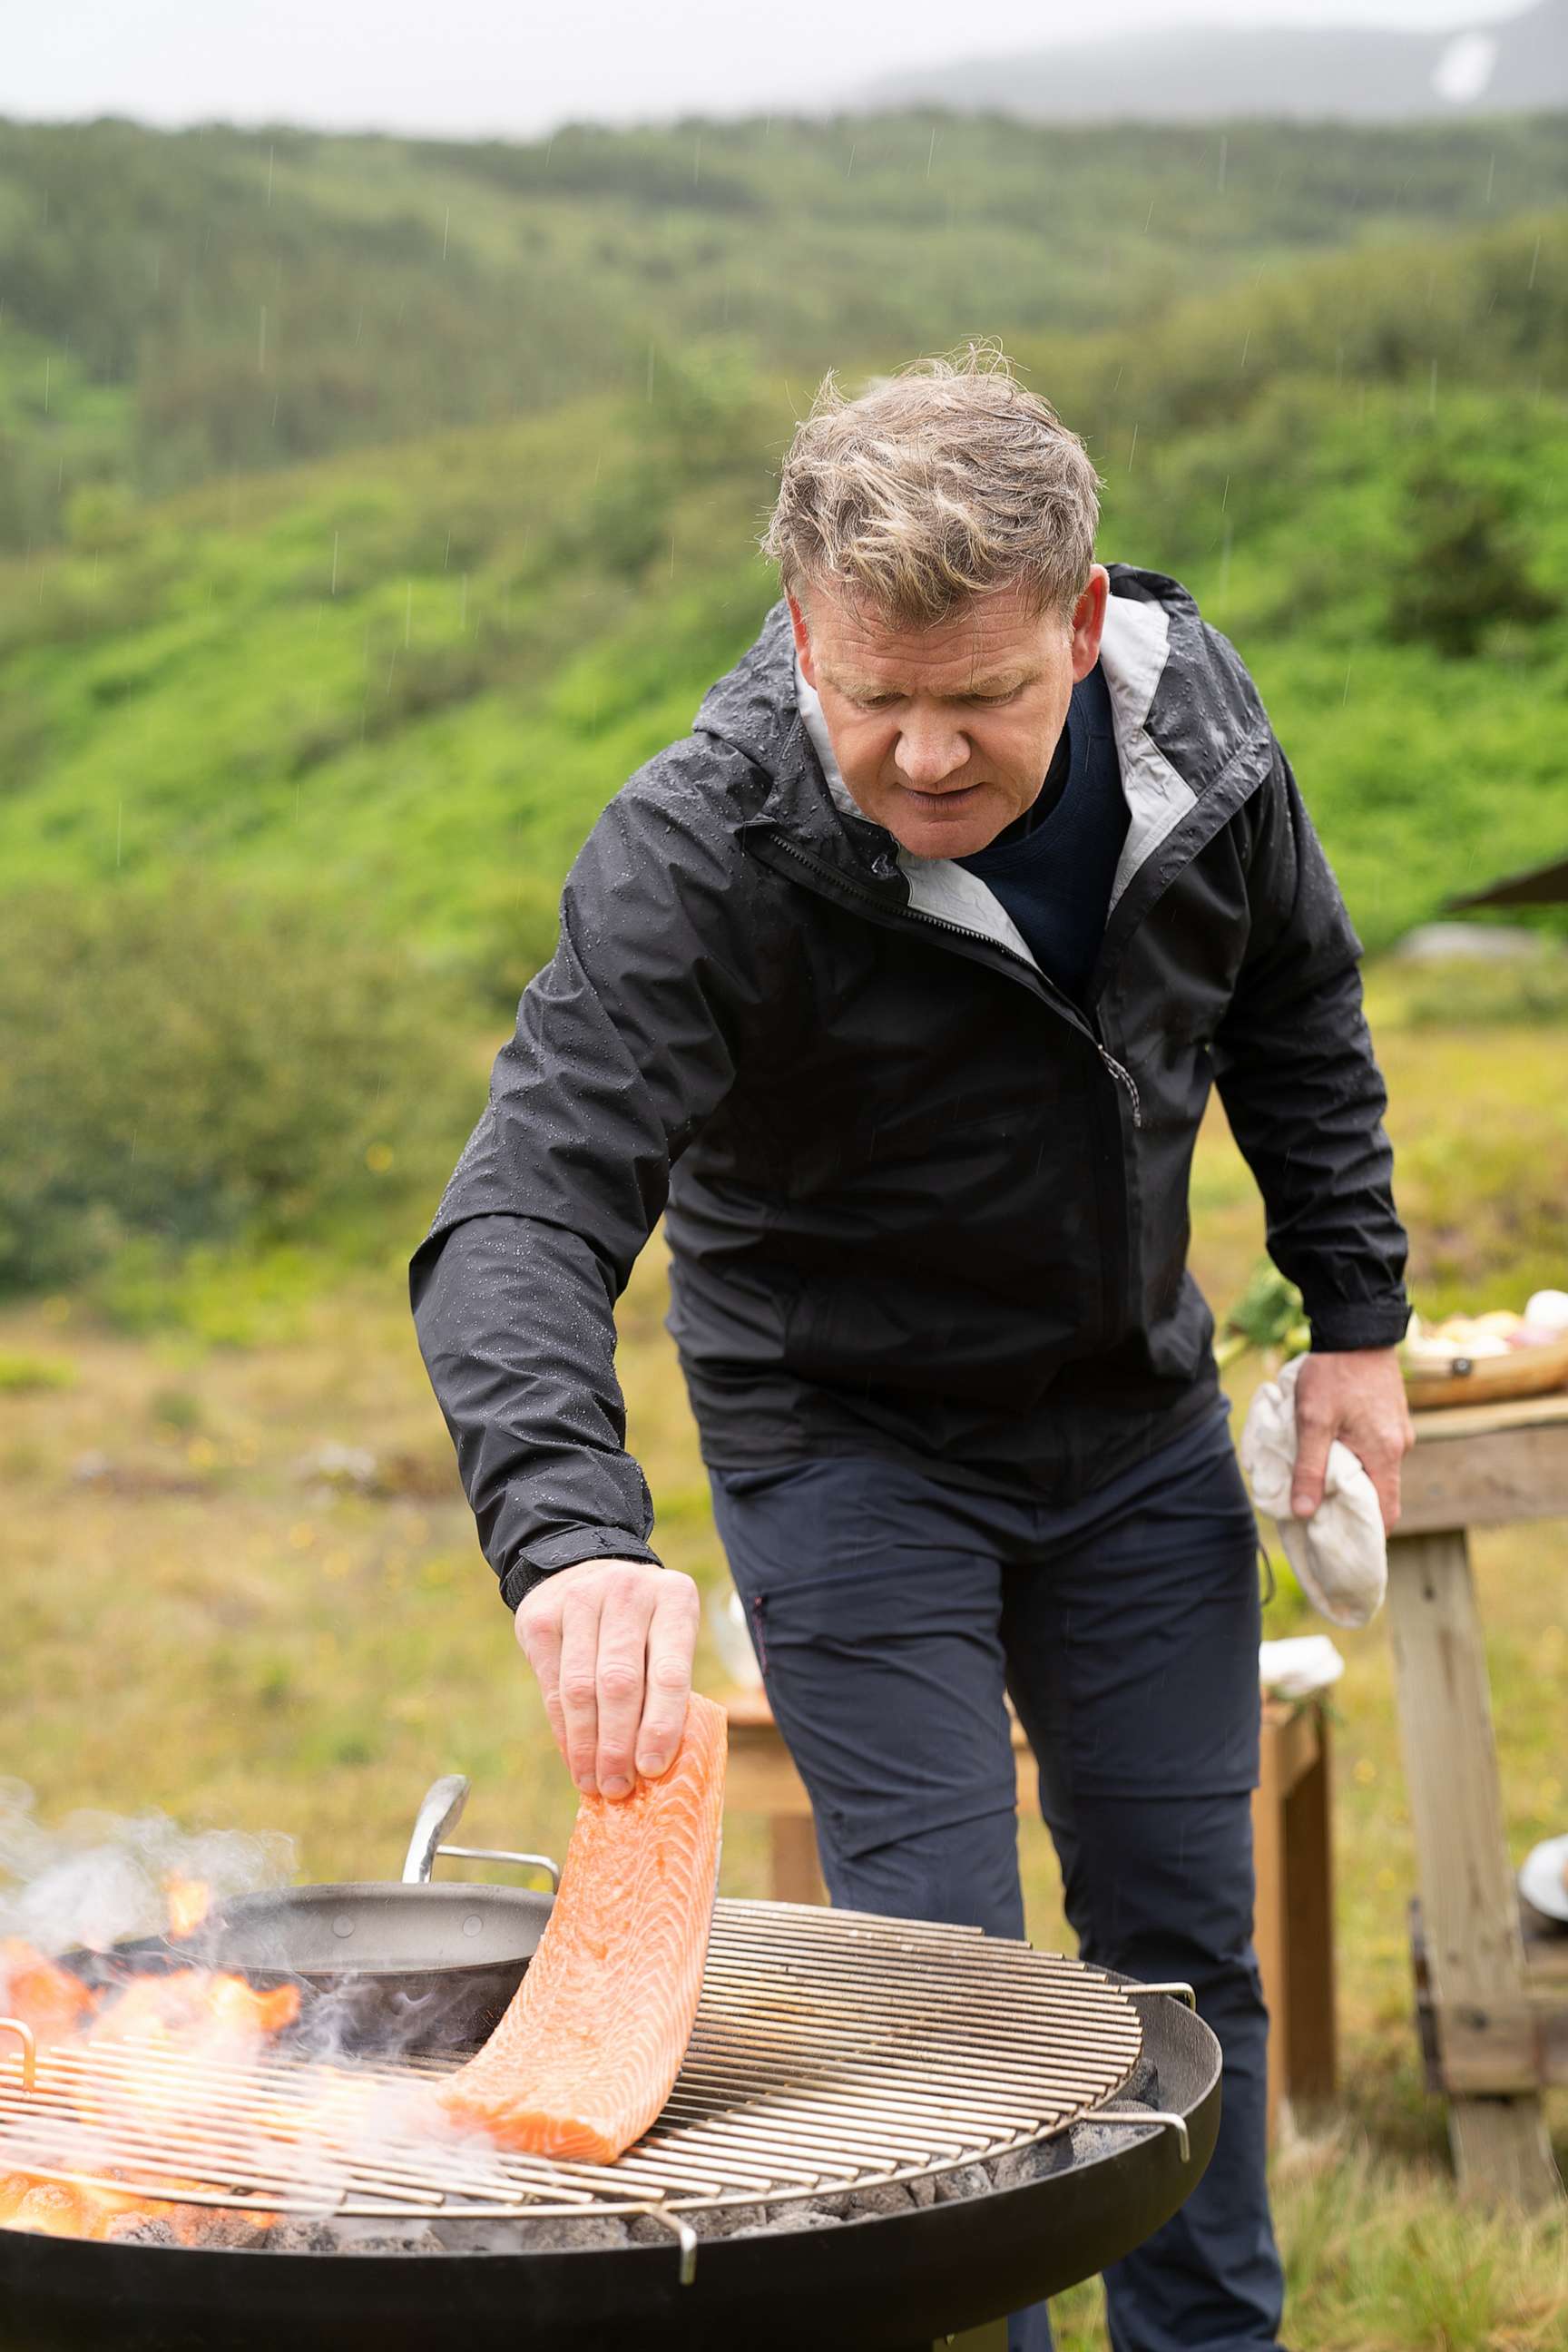 PHOTO: Rain falls as Gordon Ramsay grills fresh salmon during the final cook in Iceland.